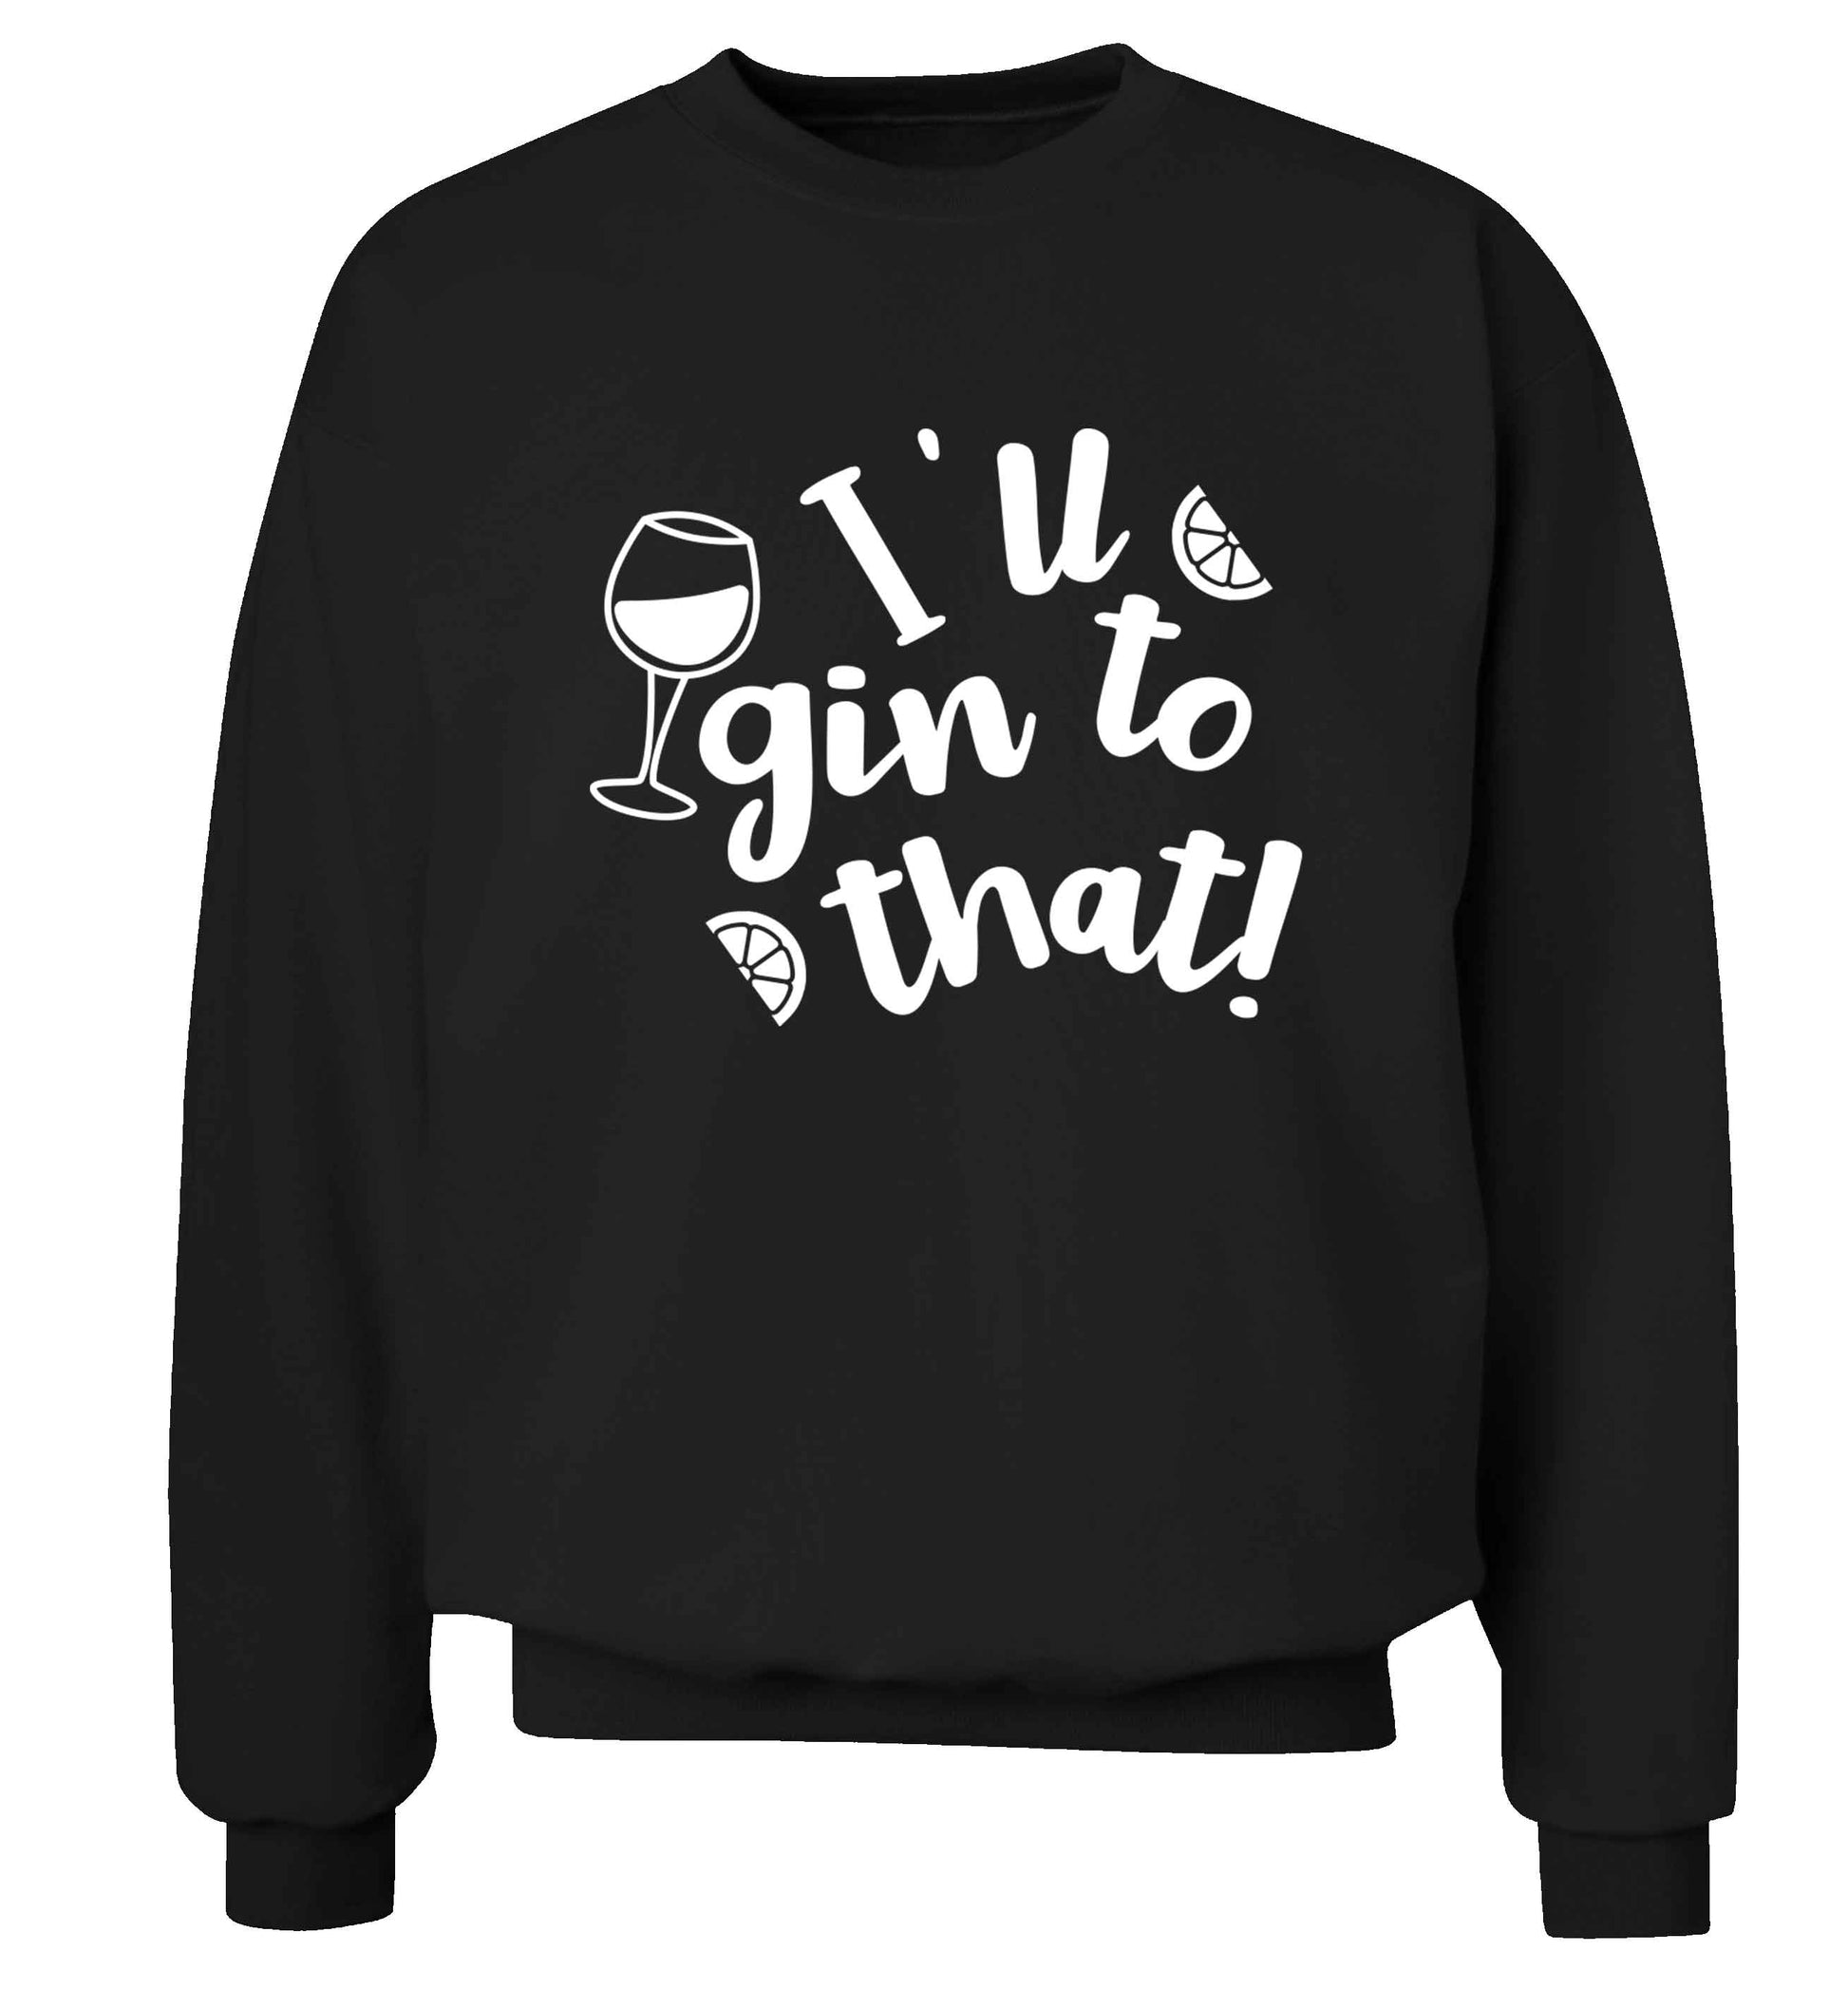 I'll gin to that! Adult's unisex black Sweater 2XL